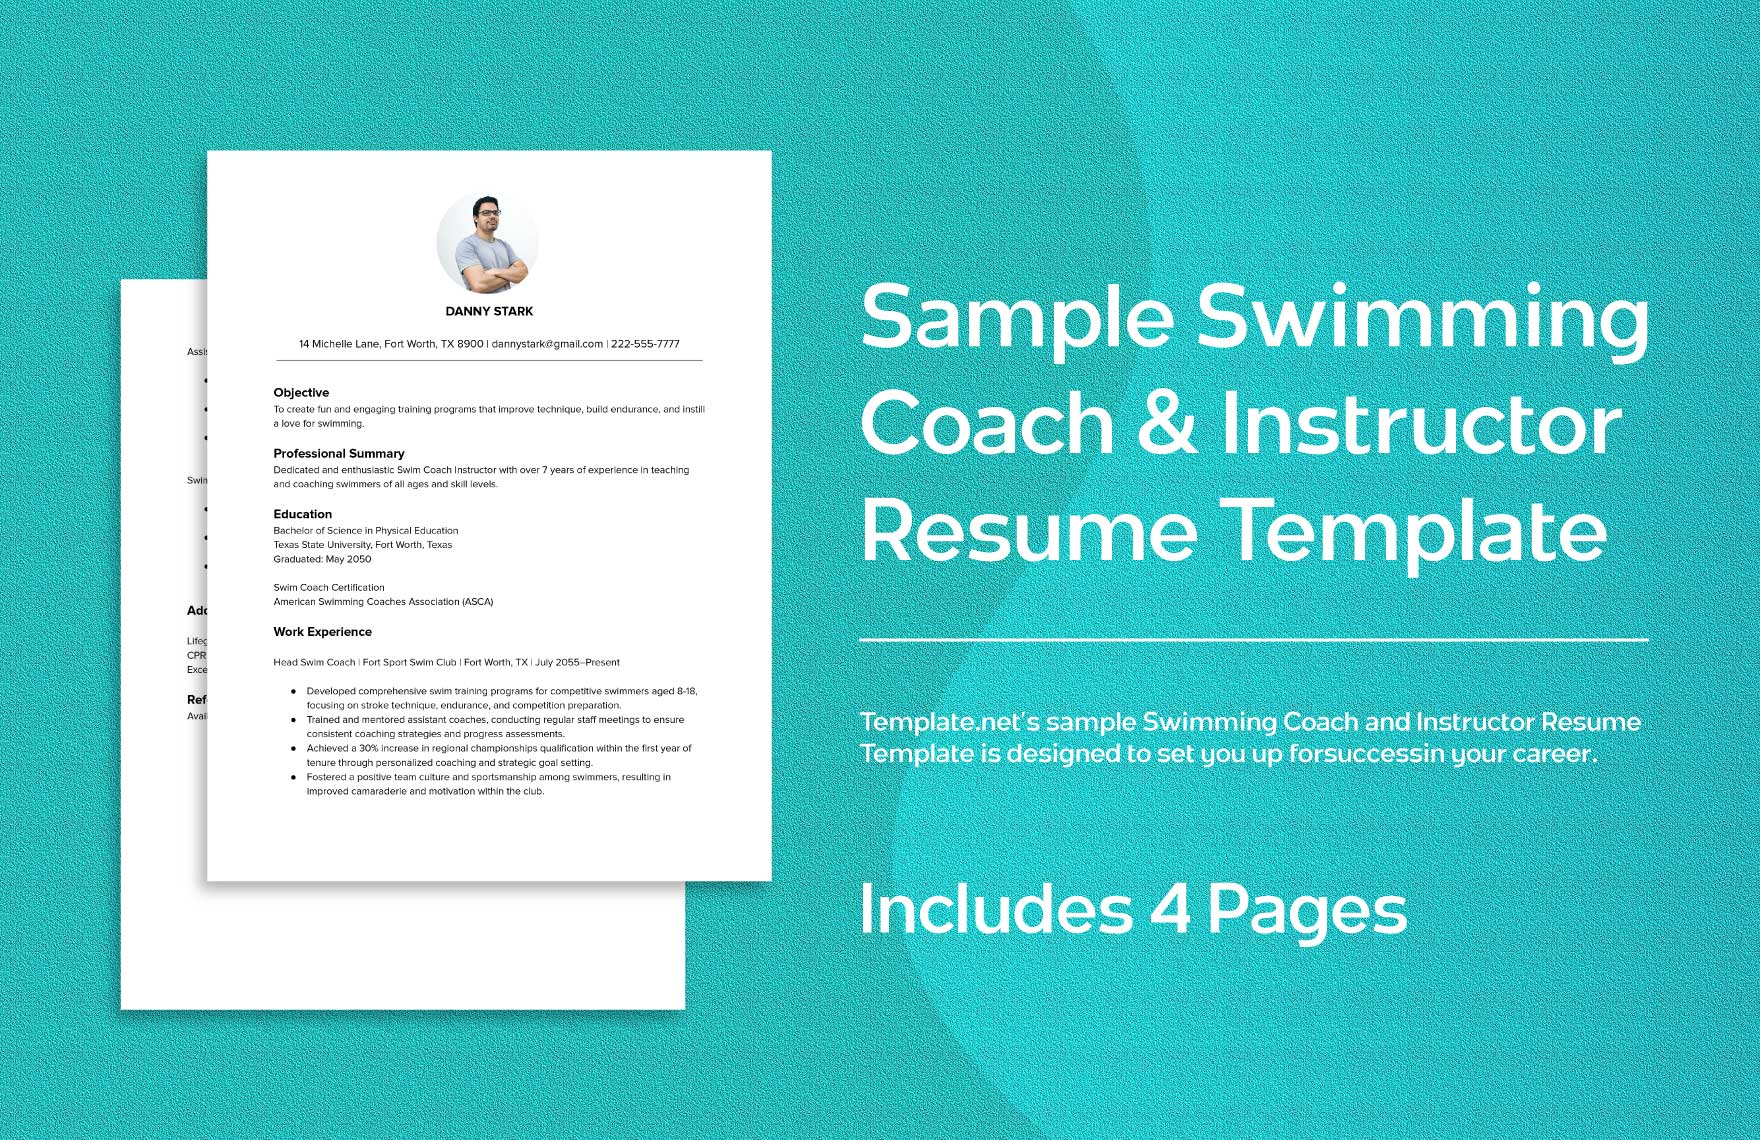 Sample Swimming Coach & Instructor Resume Template